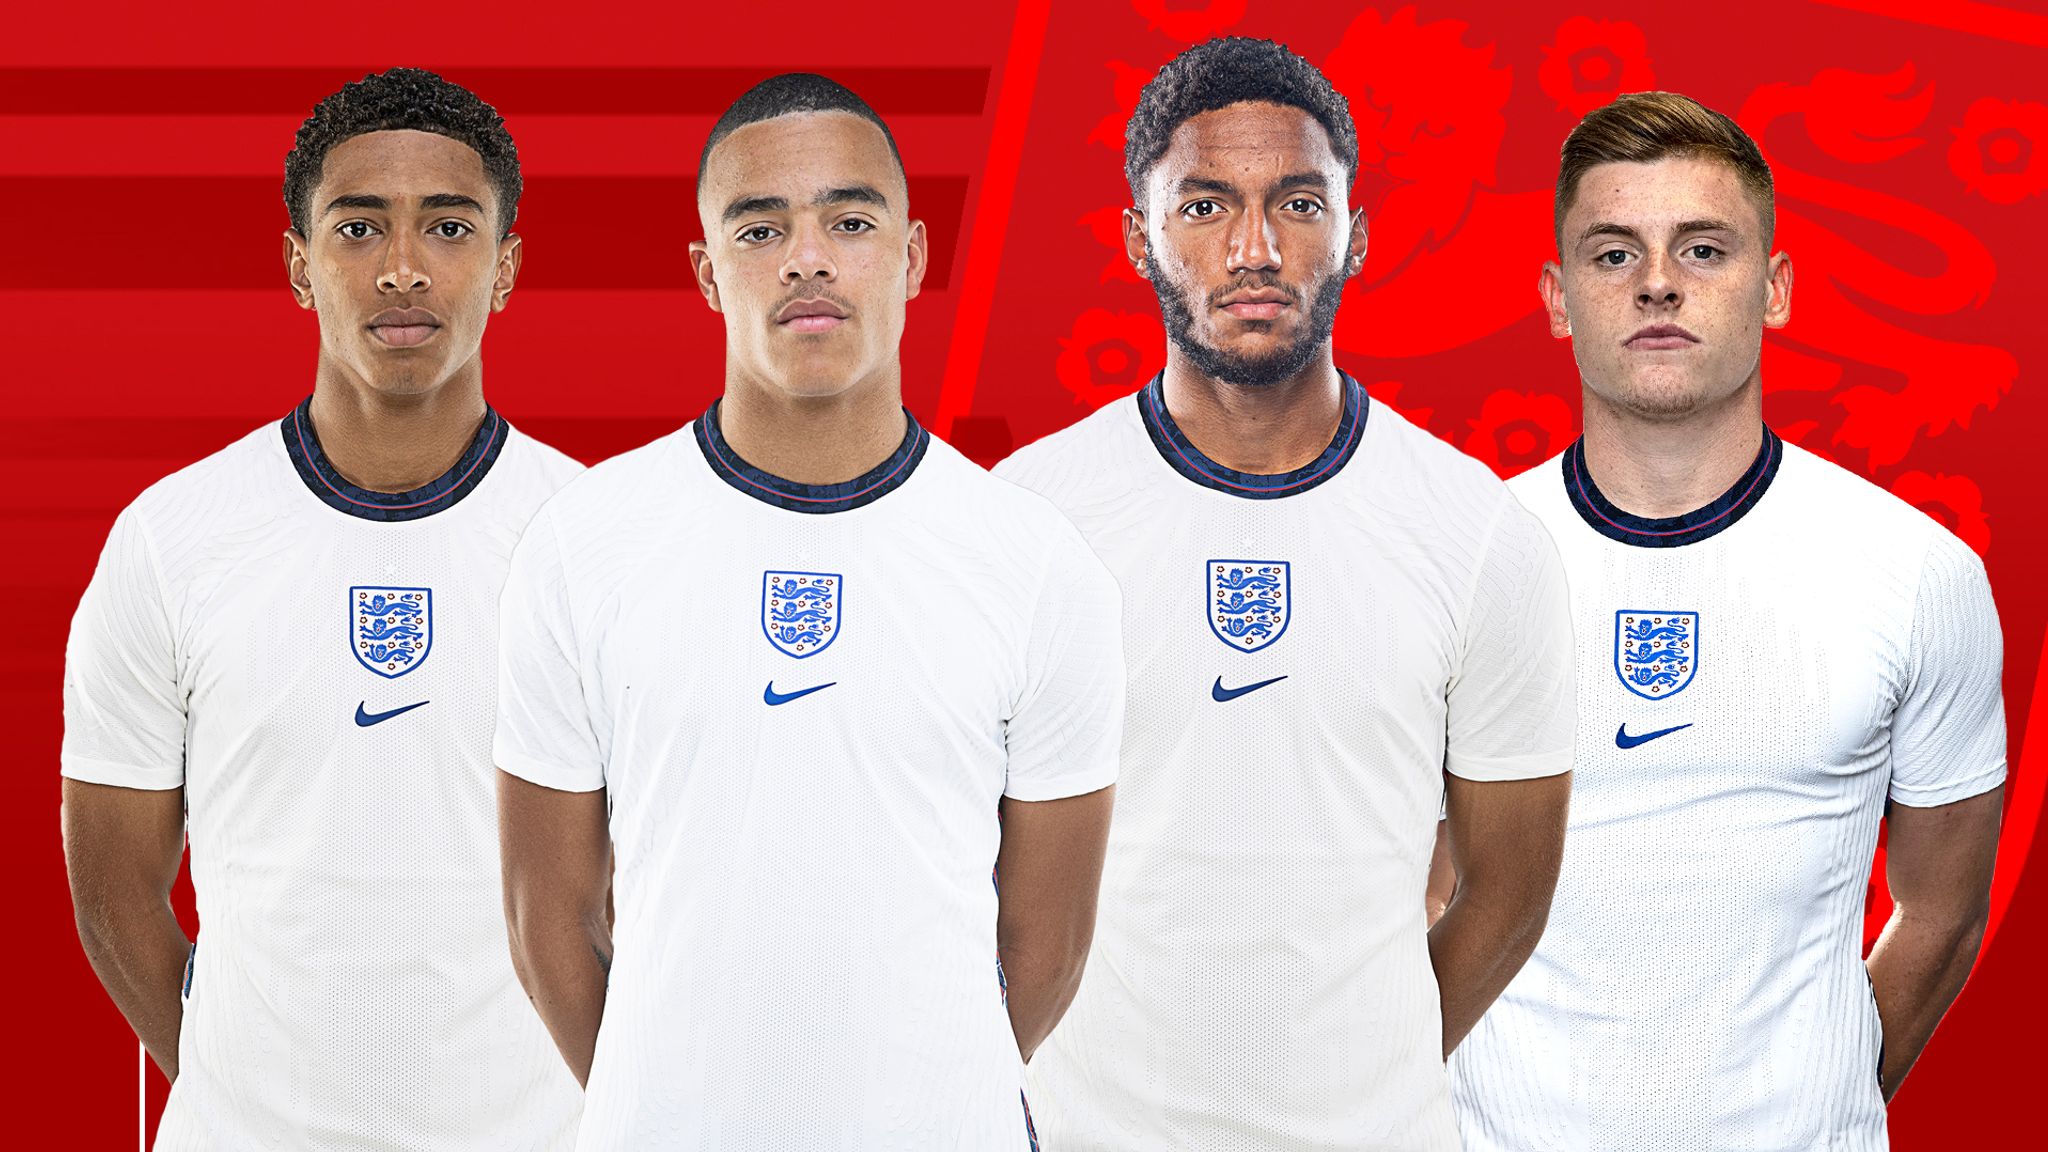 Englands stars of the 2022 World Cup in Qatar Seven players who could get Three Lions over the line Football News Sky Sports